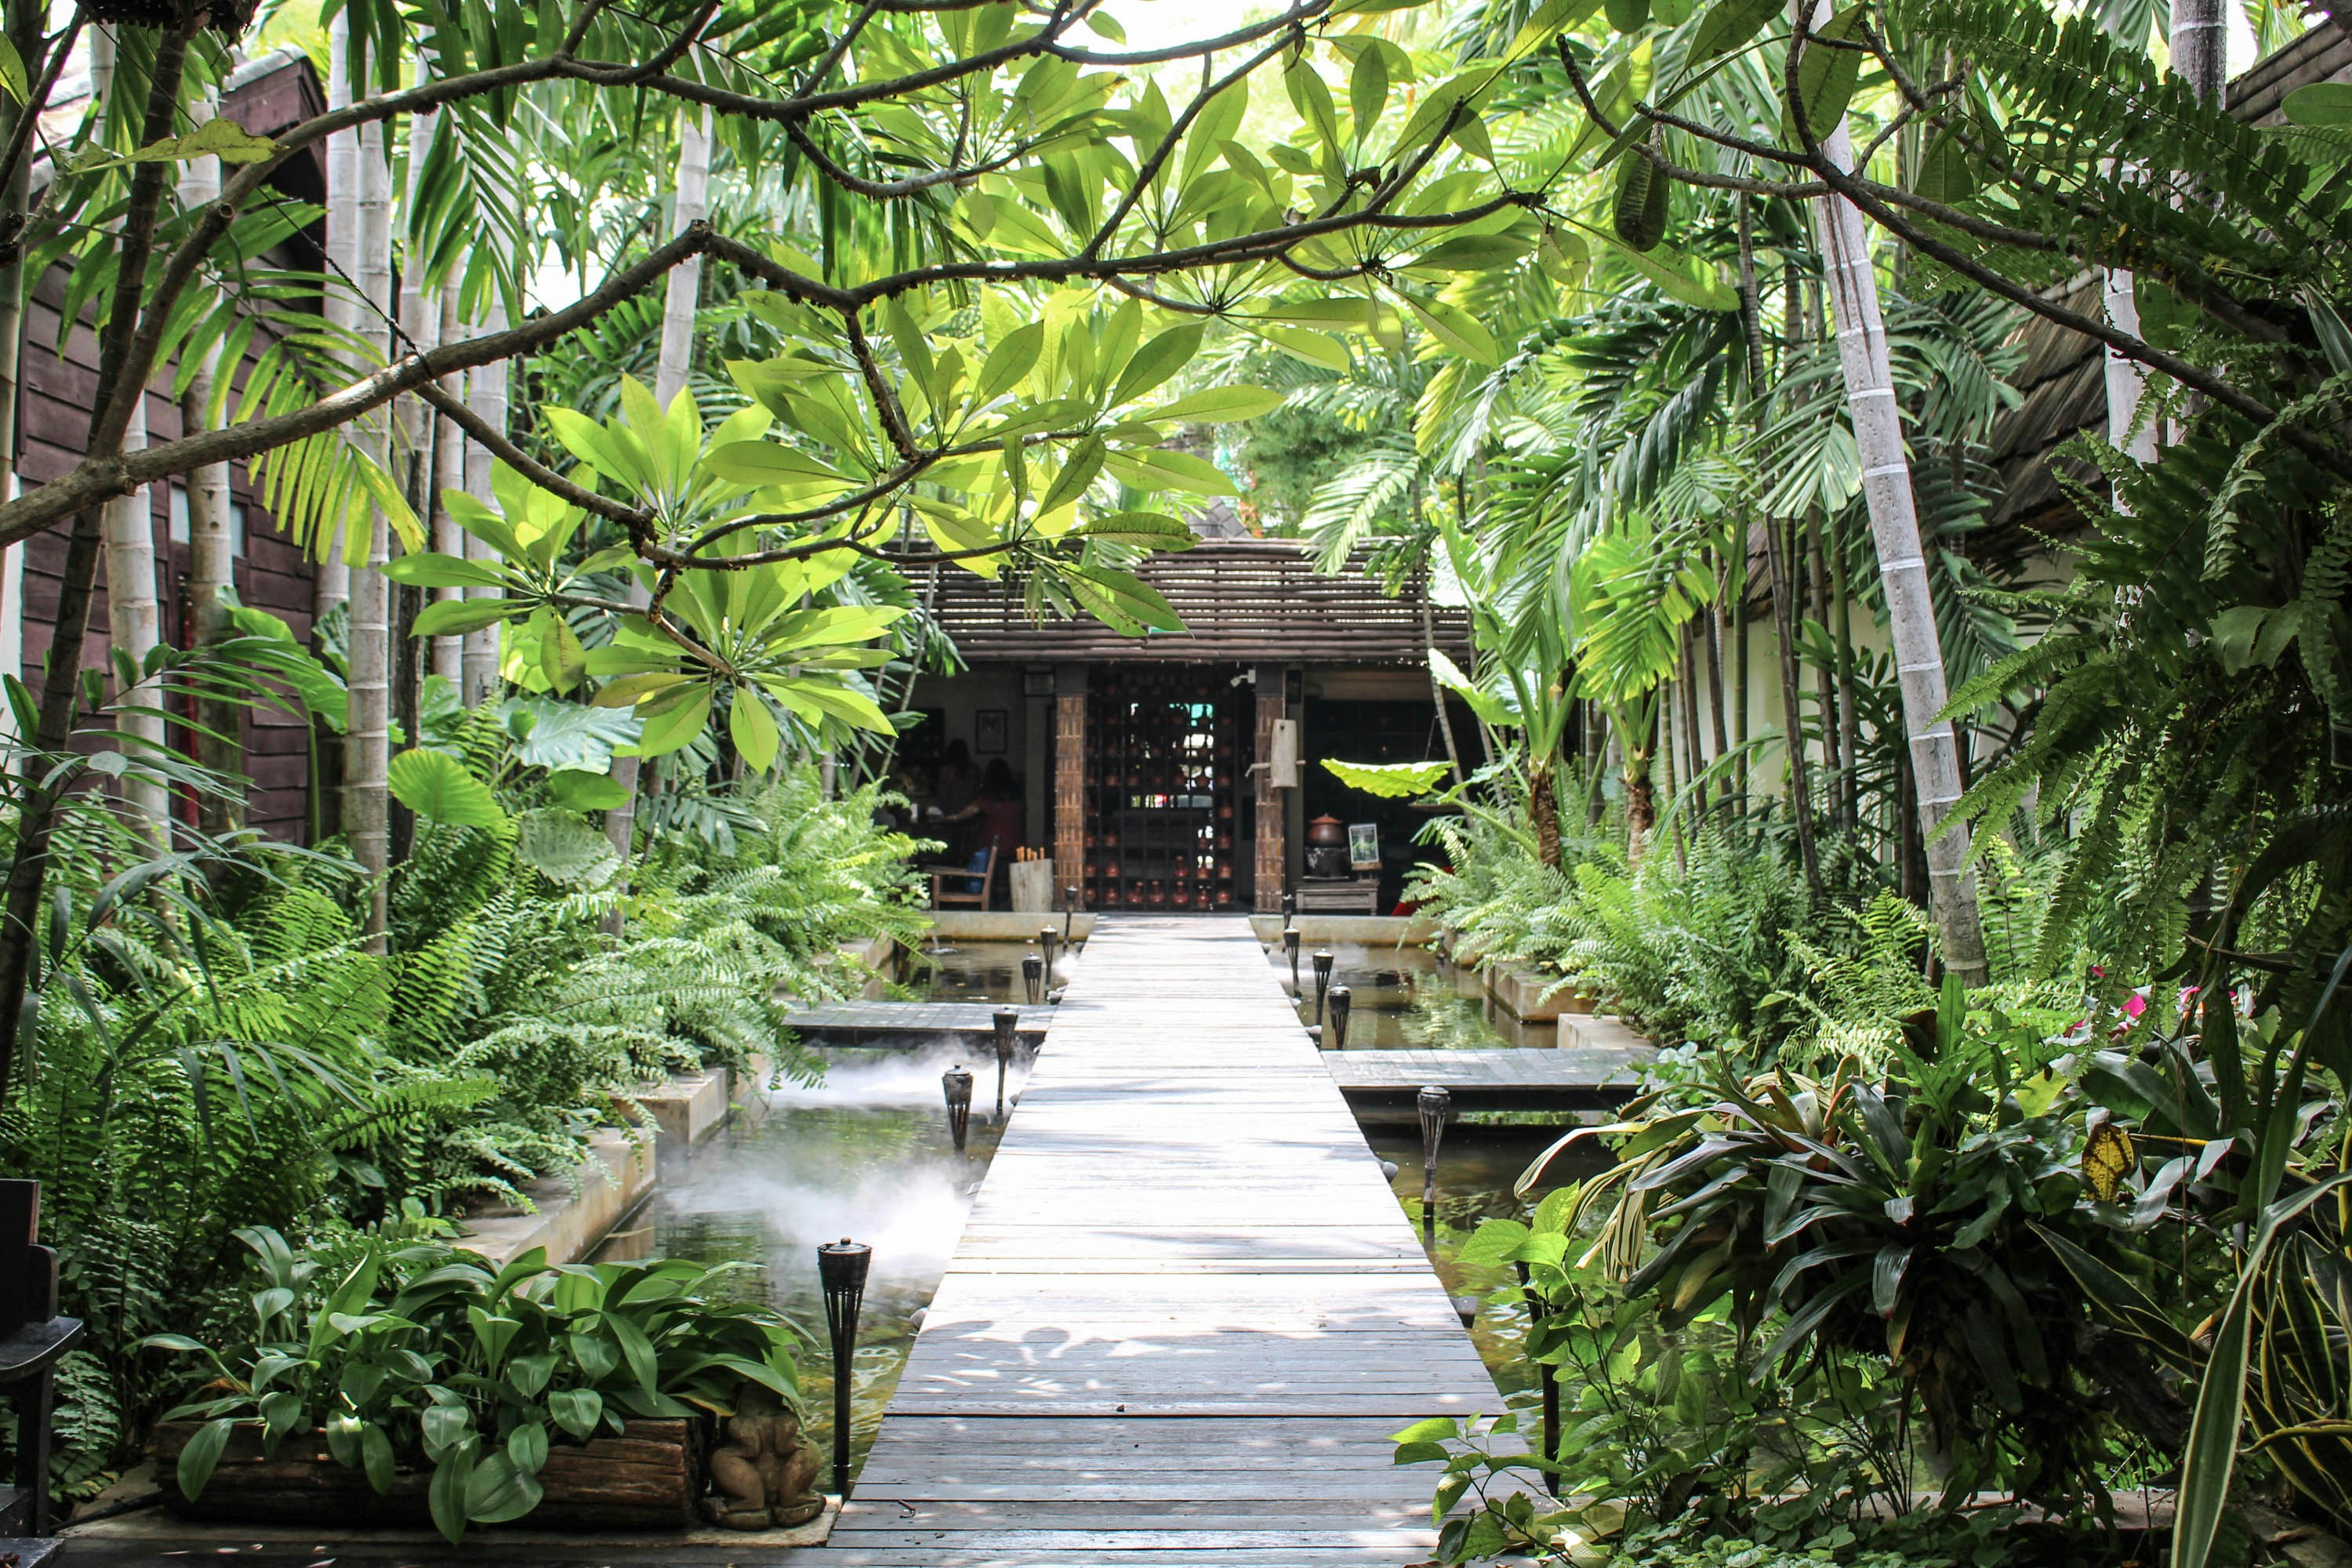 The entrance to Fah Lanna Spa in Chiang Mai: a narrow wooden boardwalk runs across a pond to the entrance of the facility, which is surrounded by greenery.